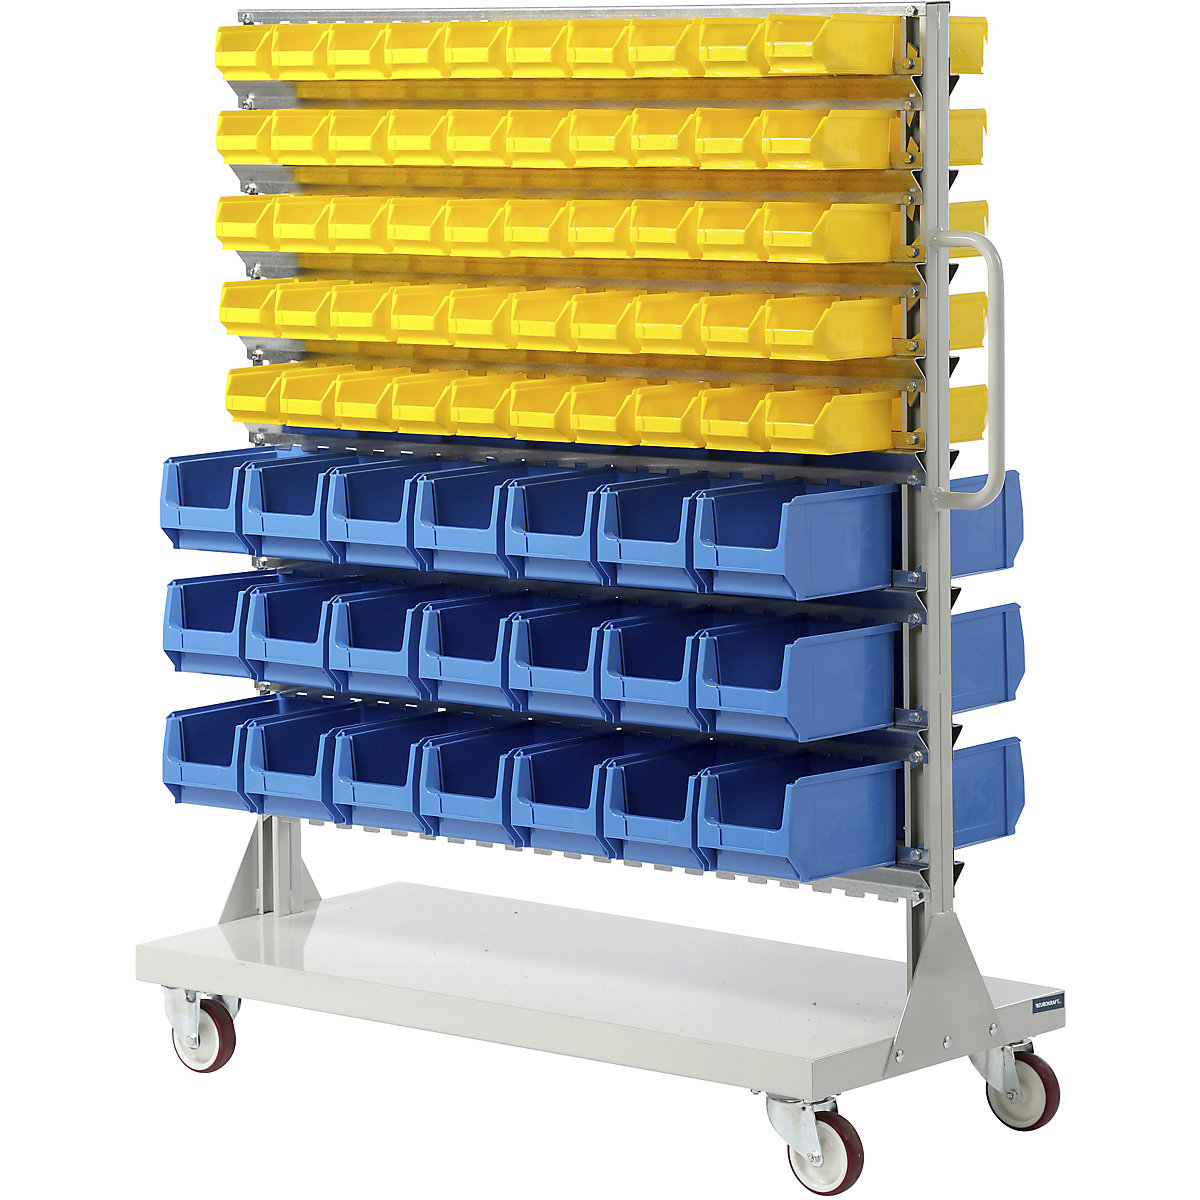 Mobile rack with open fronted storage bins – eurokraft pro, double sided, HxWxD 1450 x 1170 x 540 mm, with 156 bins-5